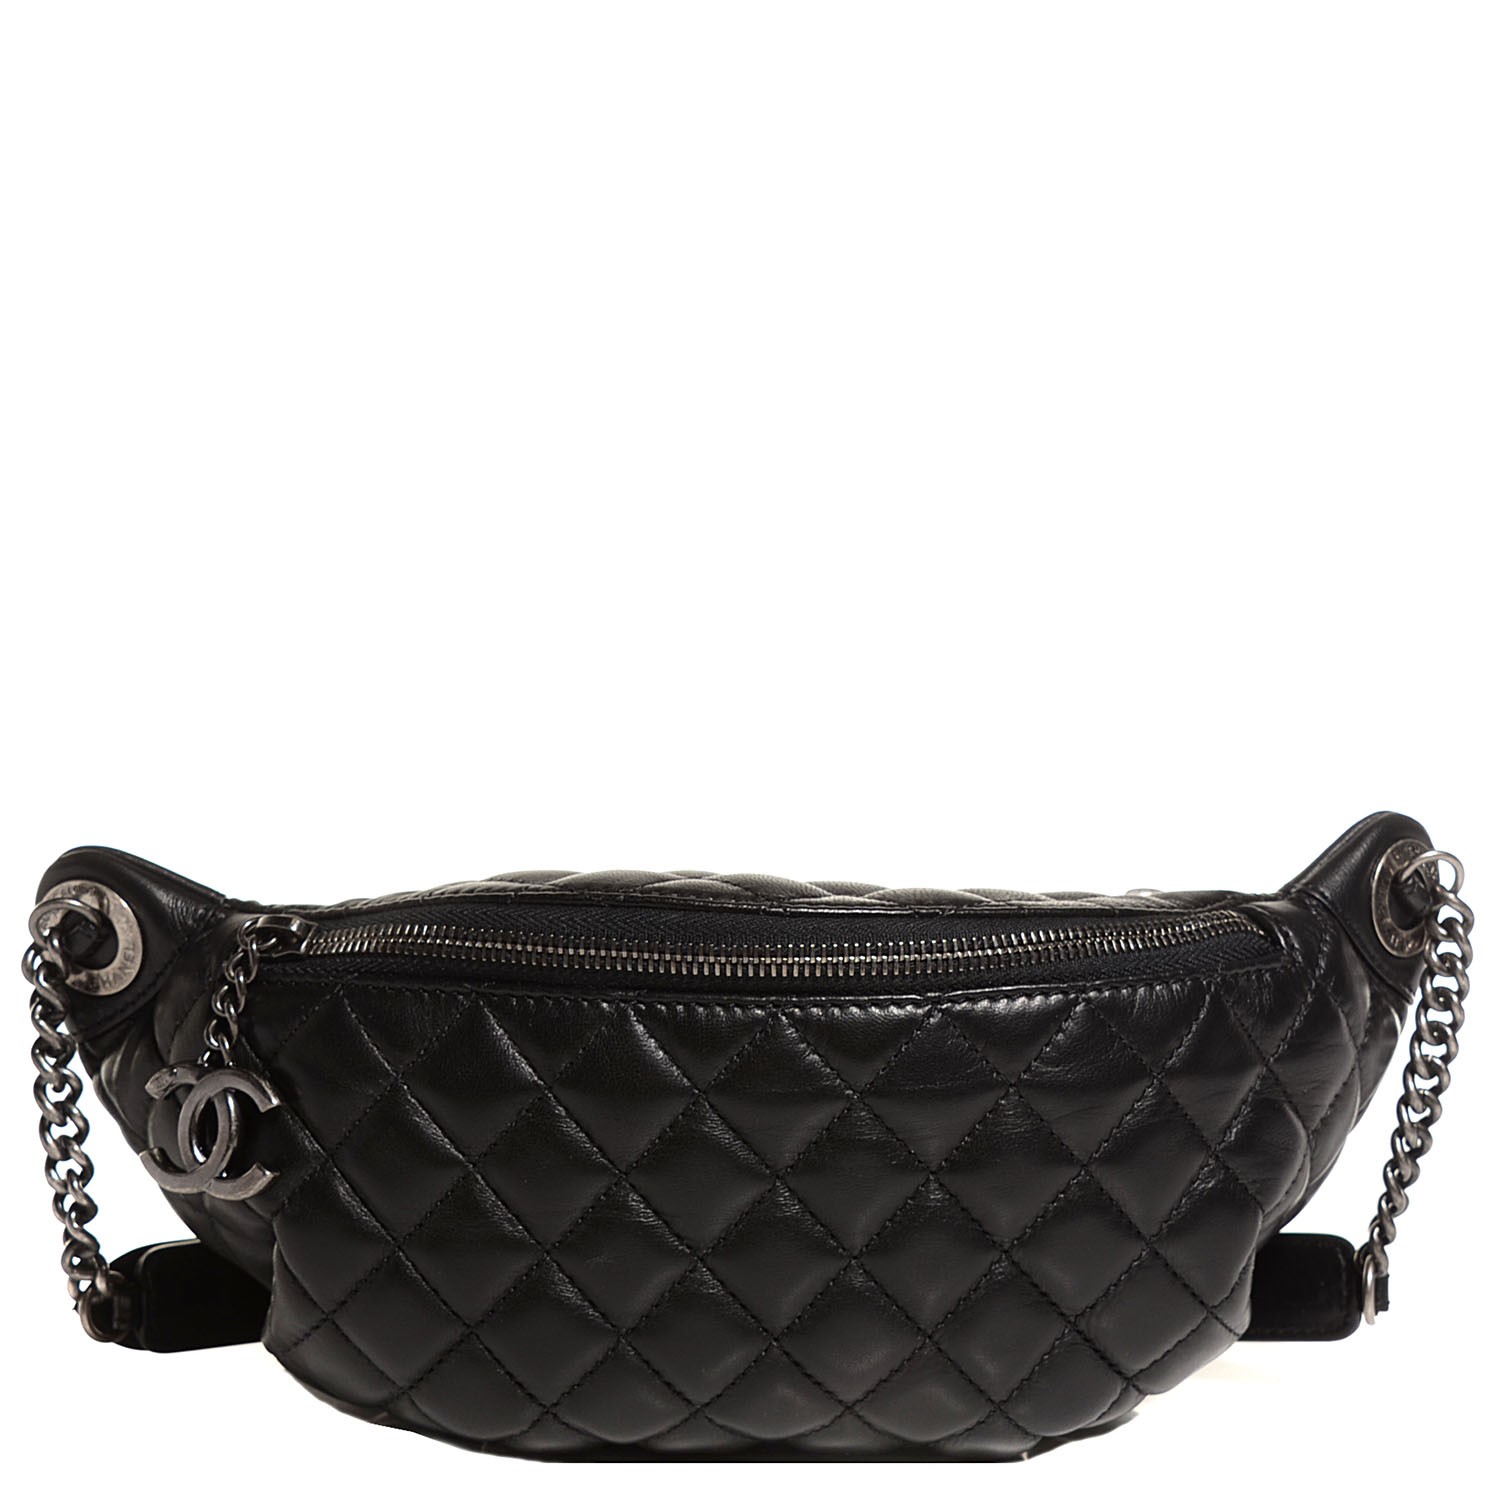 CHANEL Lambskin Quilted Banane Waist Bag Fanny Pack Black 100926 | FASHIONPHILE